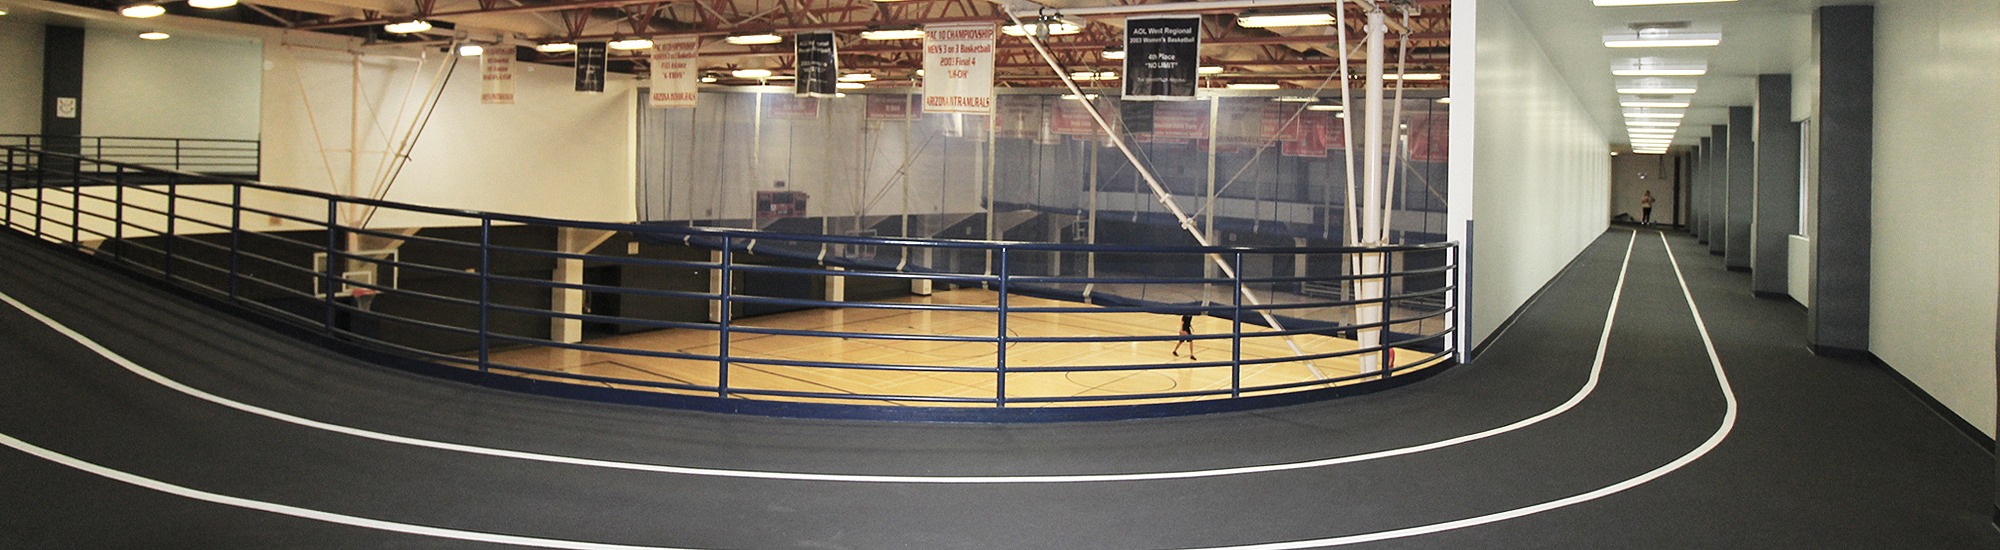 Indoor track on the second floor of a gym, basketball courts visible in the center of the track